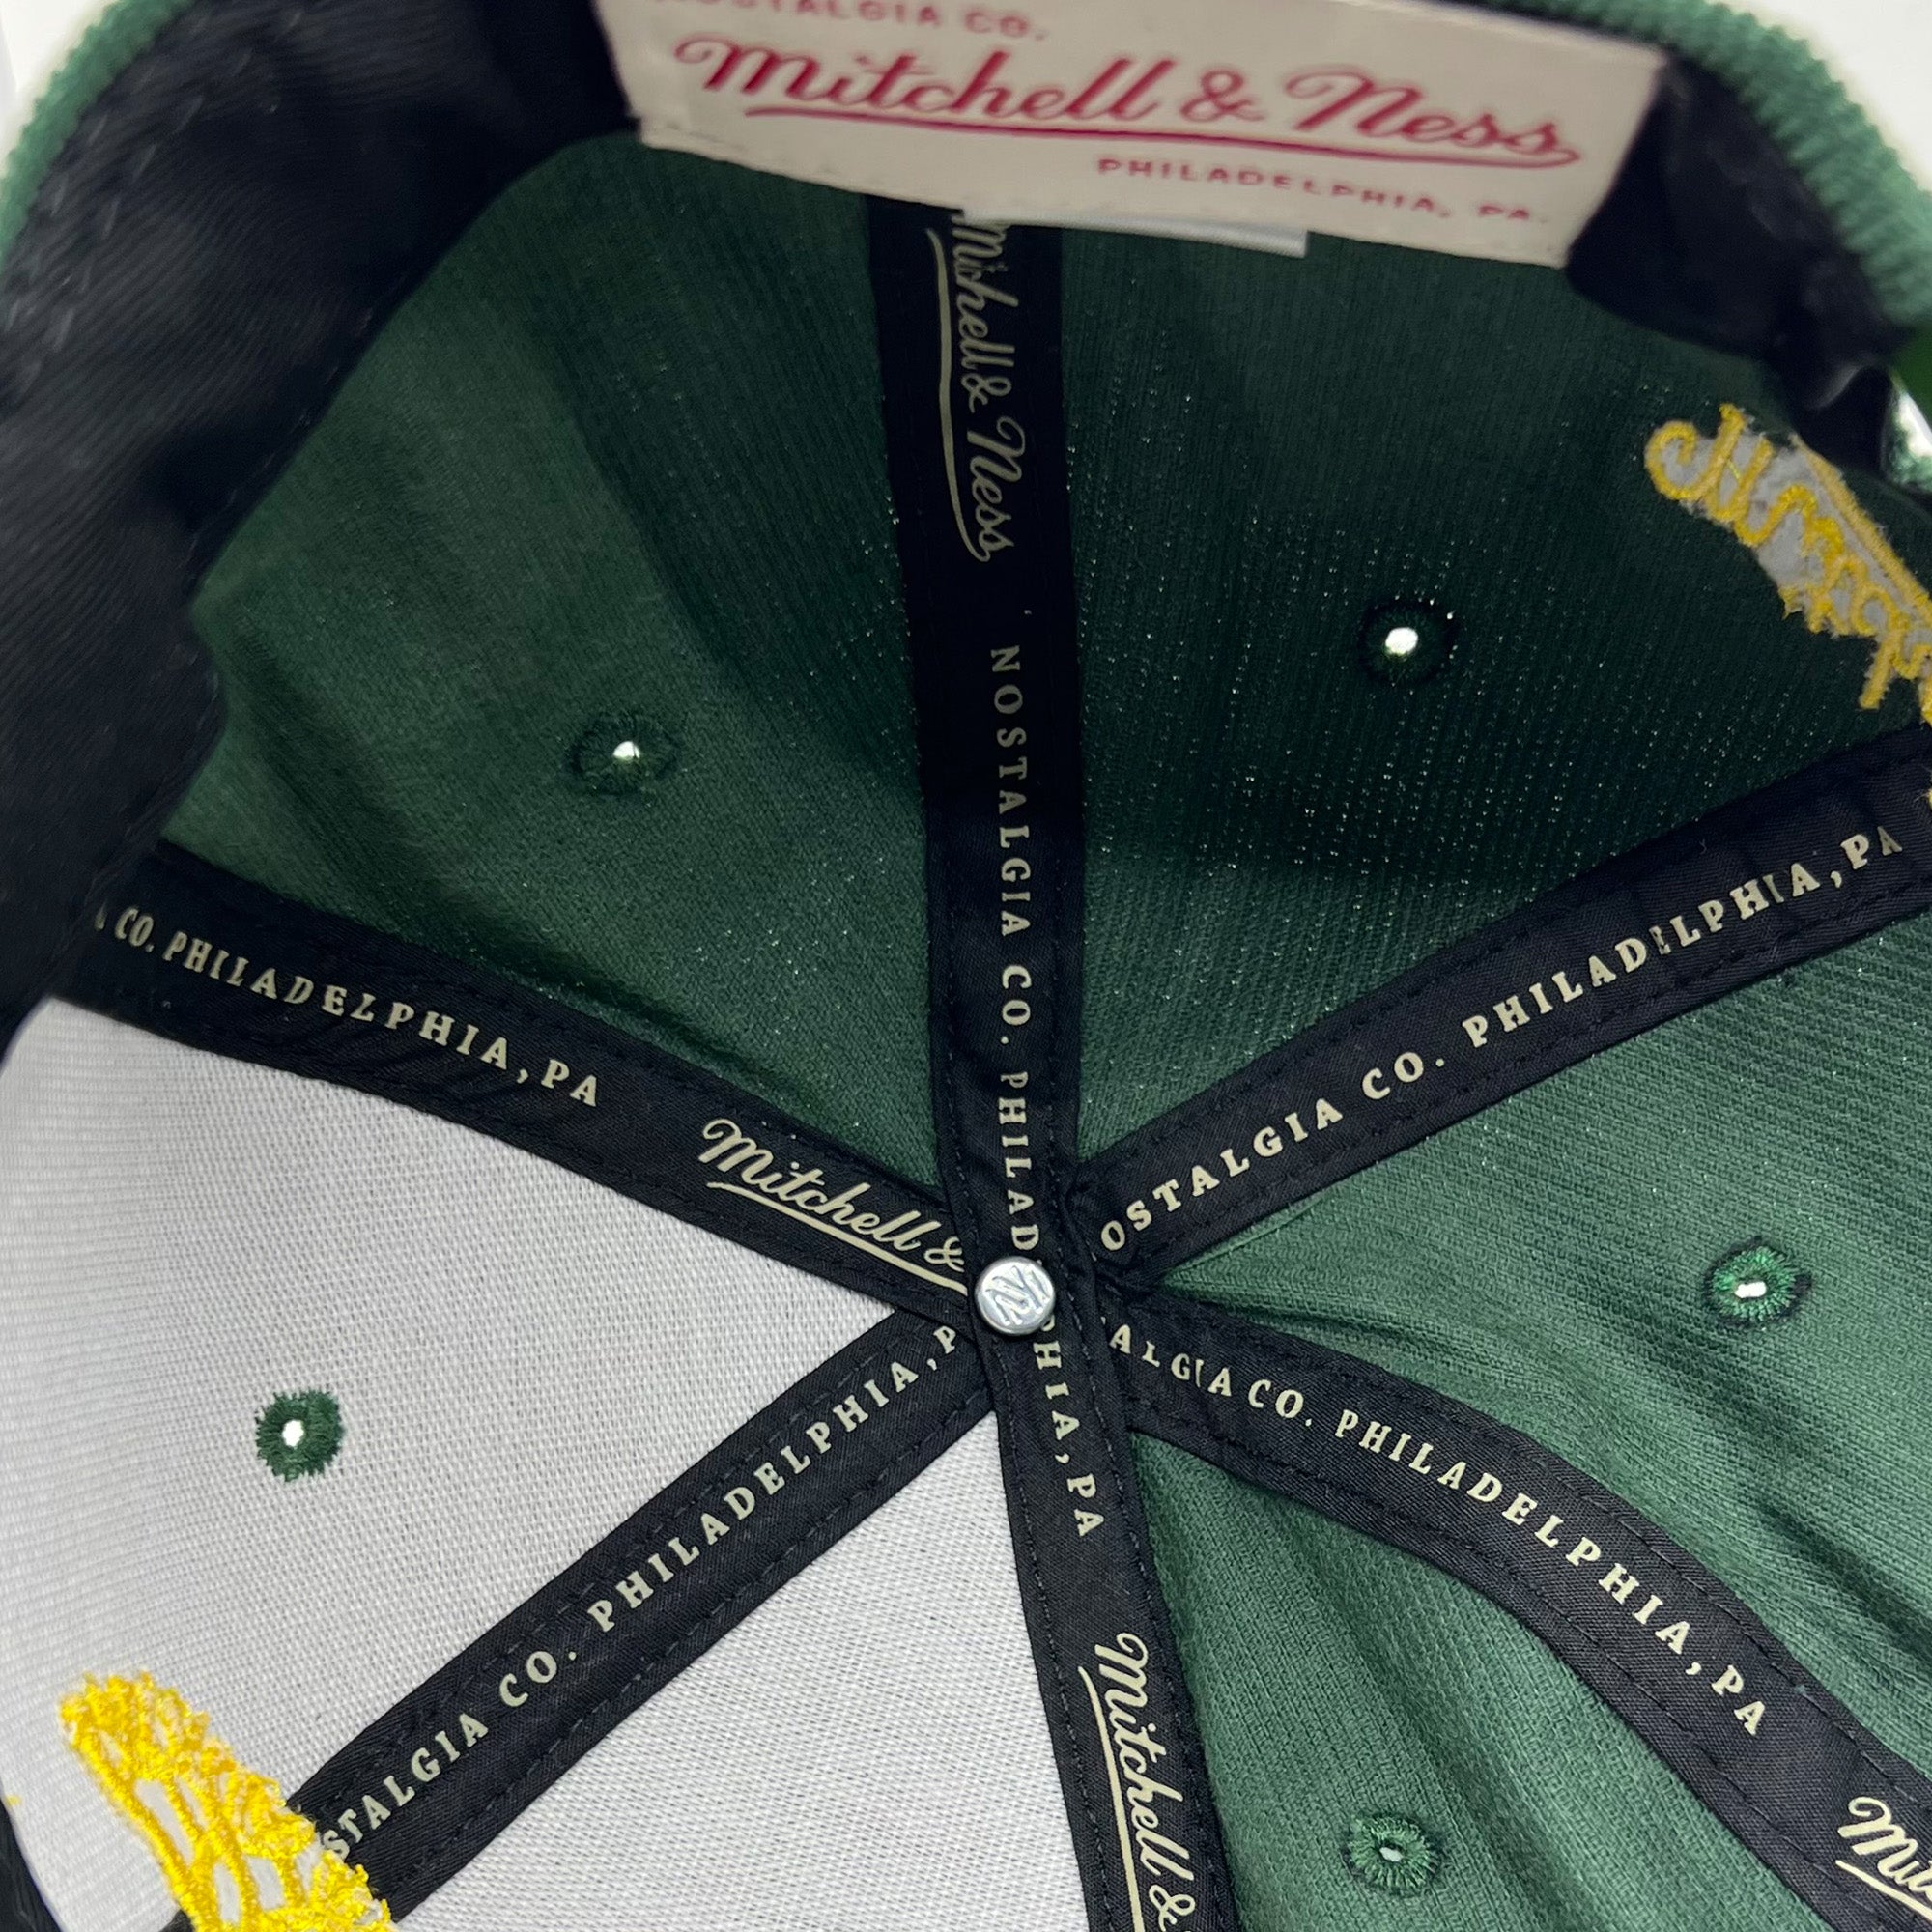 Detailed close up of Mitchell & Ness taping inside crown of green corduroy Oaklandish x Mitchell & Ness cap..